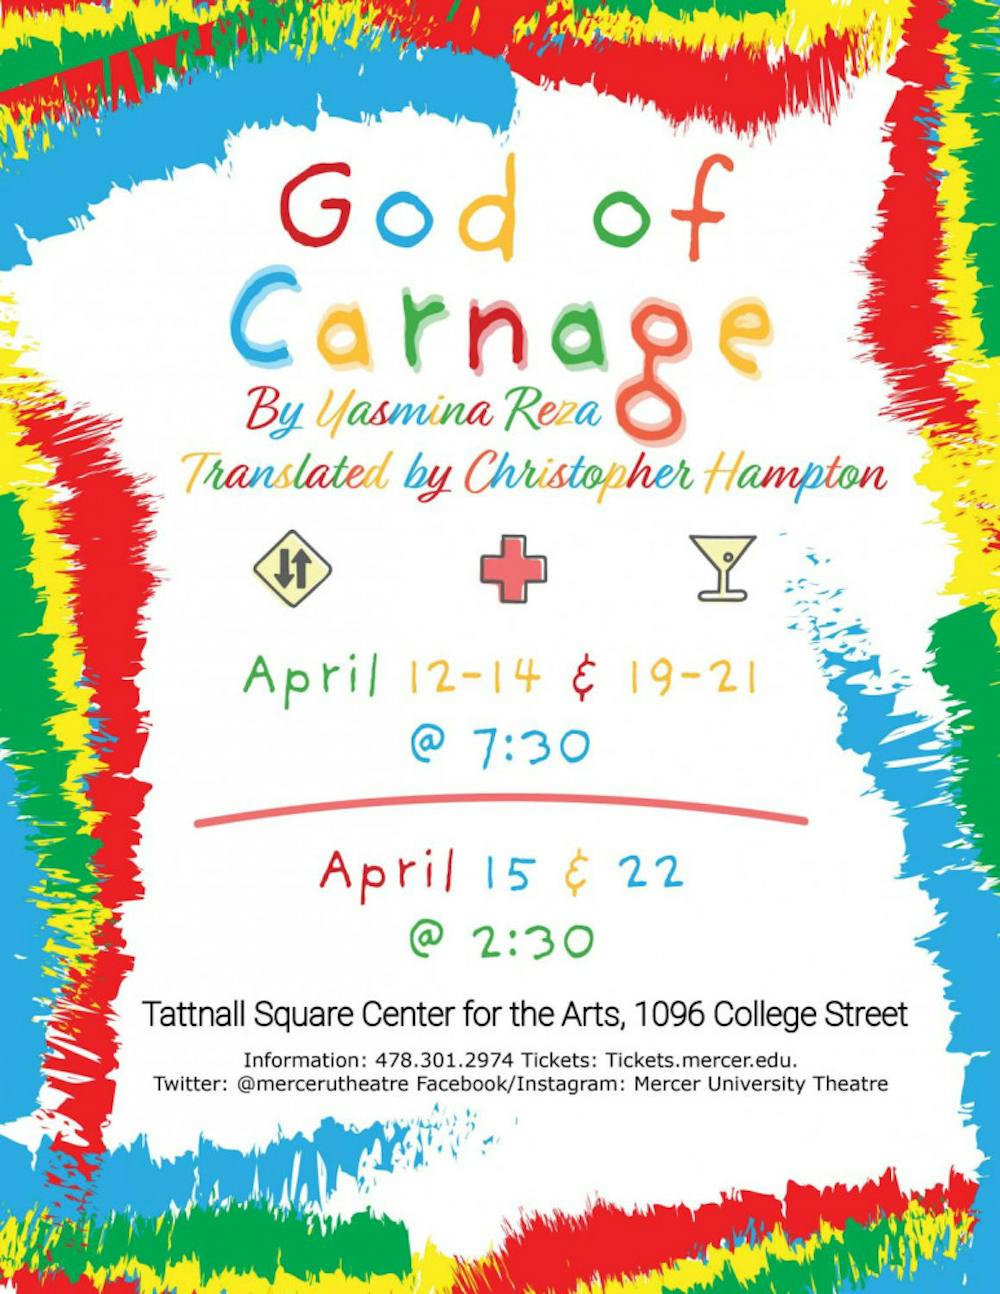 God of Carnage opens April 12th in Tattnall Square Center for the Arts. 